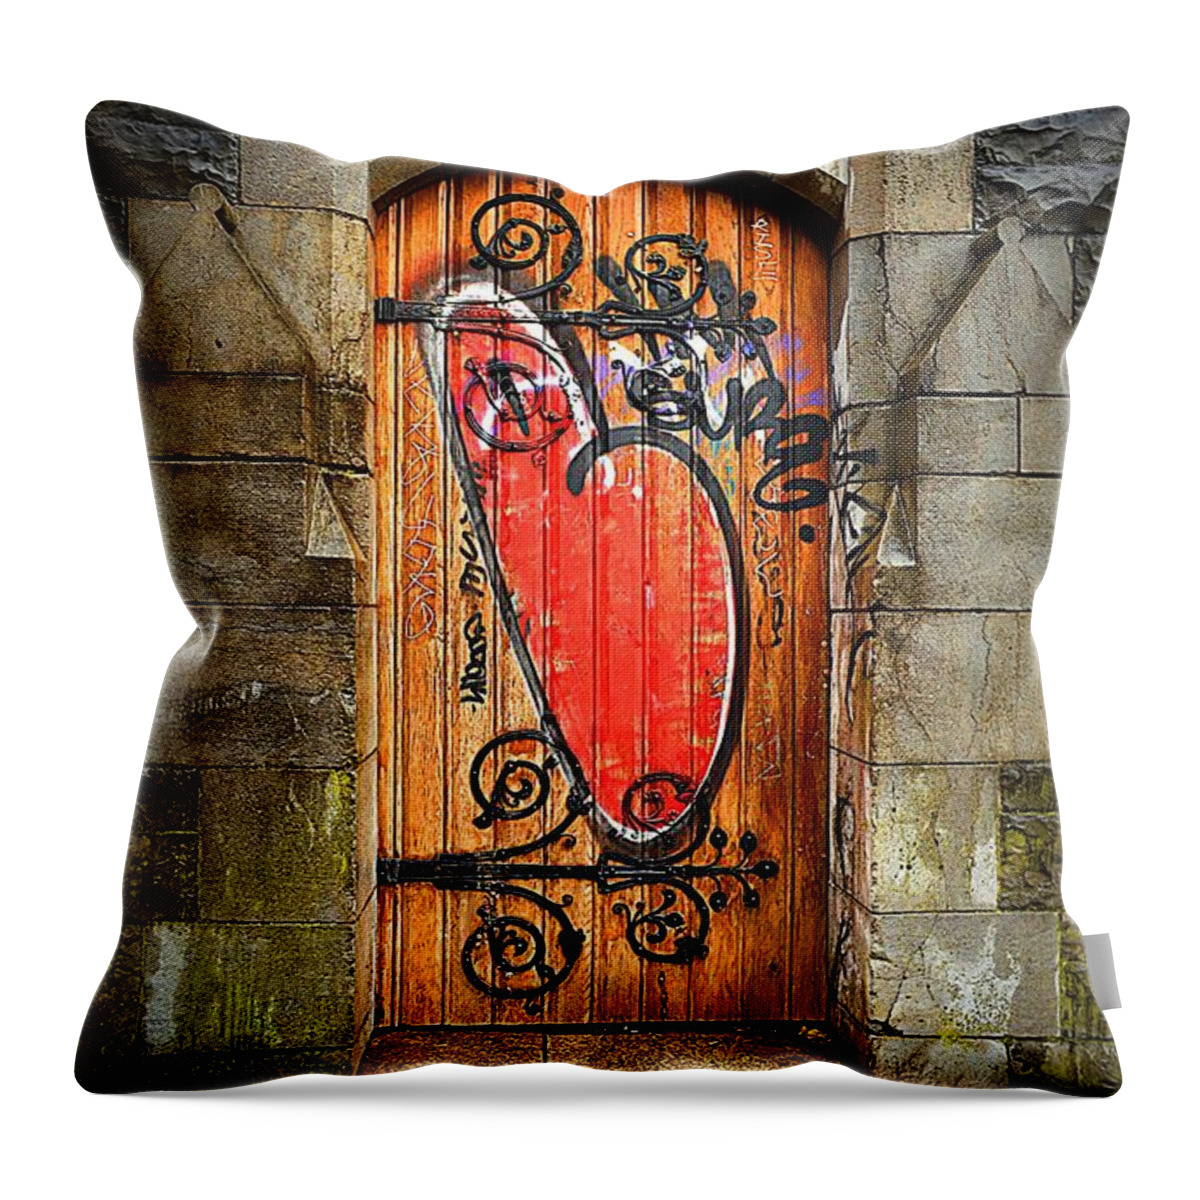 Graffiti Throw Pillow featuring the photograph Have a Heart - Don't Desecrate by Nadalyn Larsen